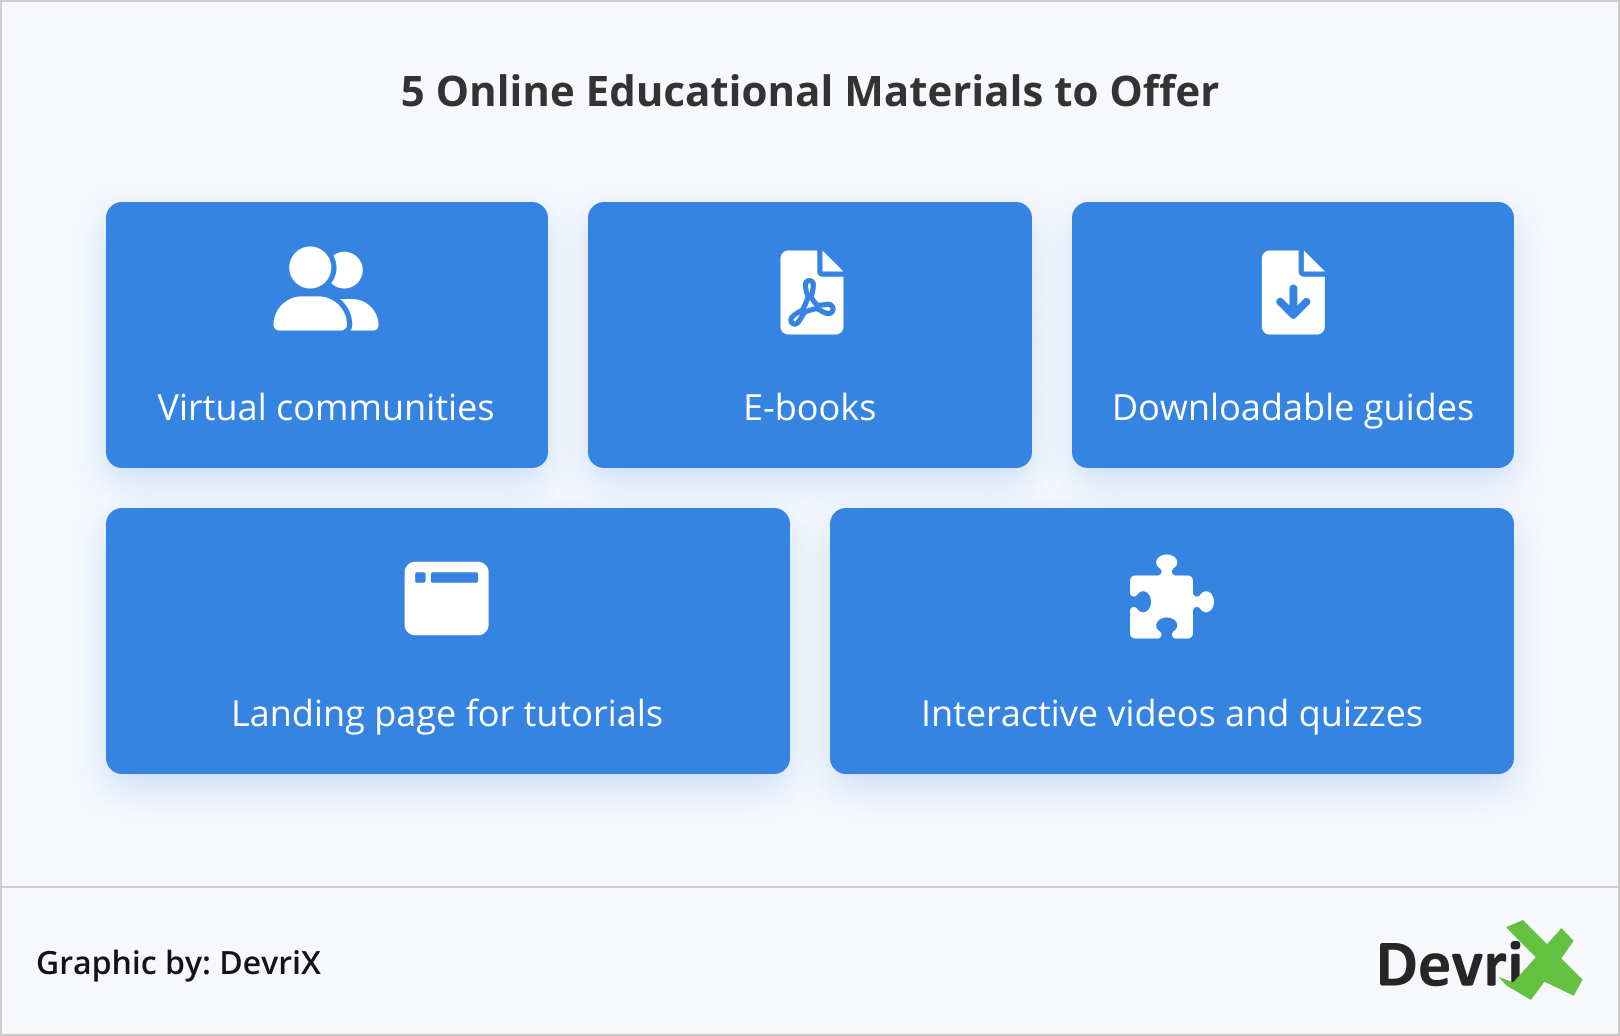 5 Online Educational Materials to Offer